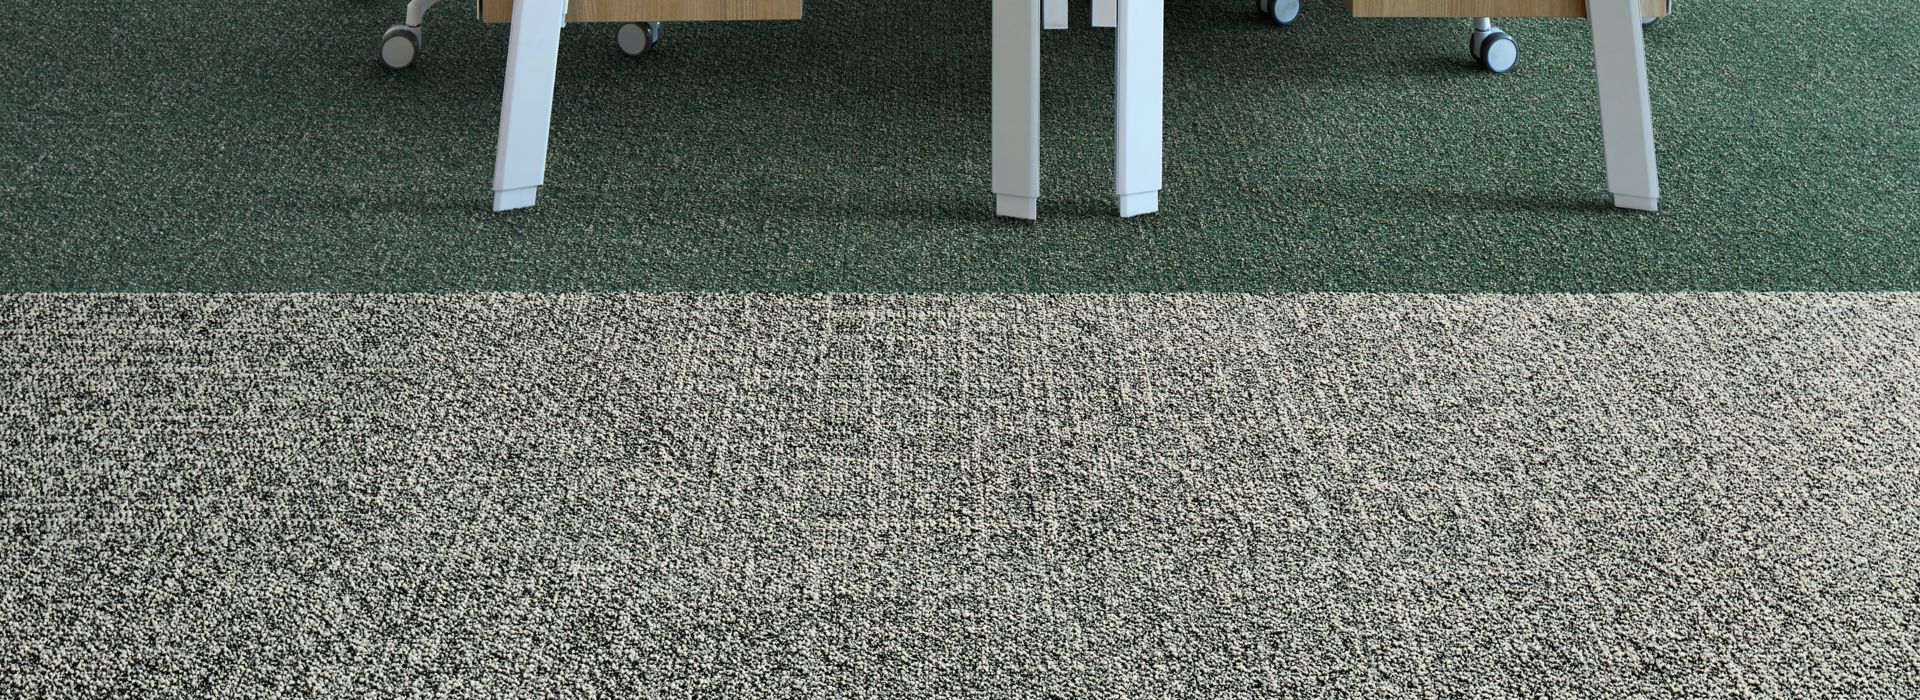 Interface Heart Songs carpet tile in workspace with two wood desks and chairs numéro d’image 1